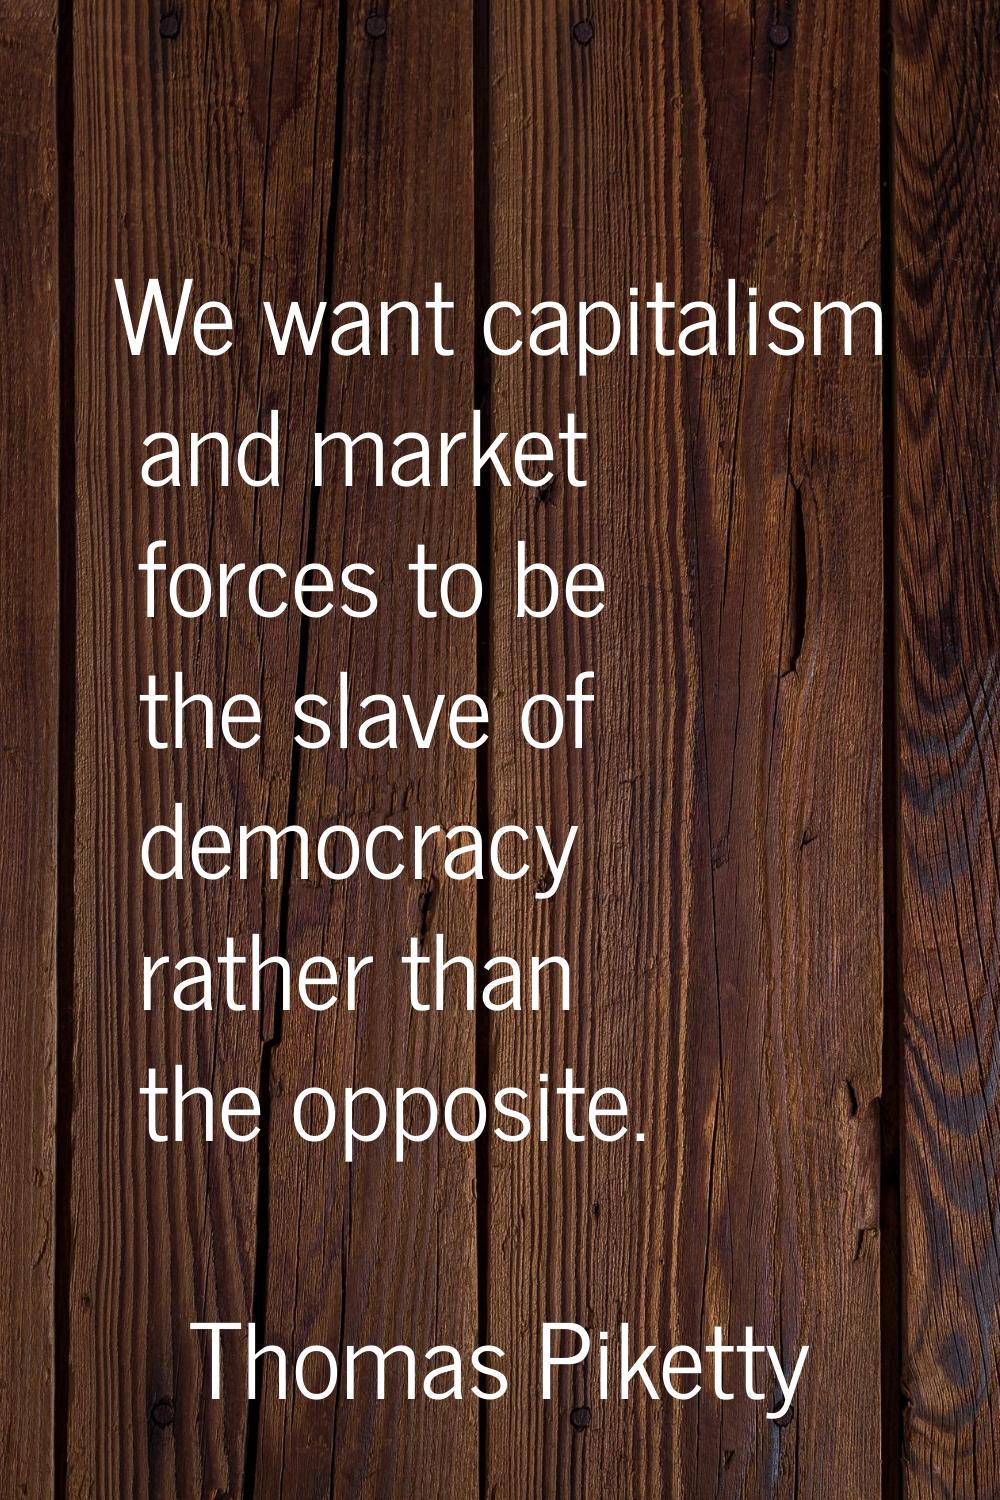 We want capitalism and market forces to be the slave of democracy rather than the opposite.